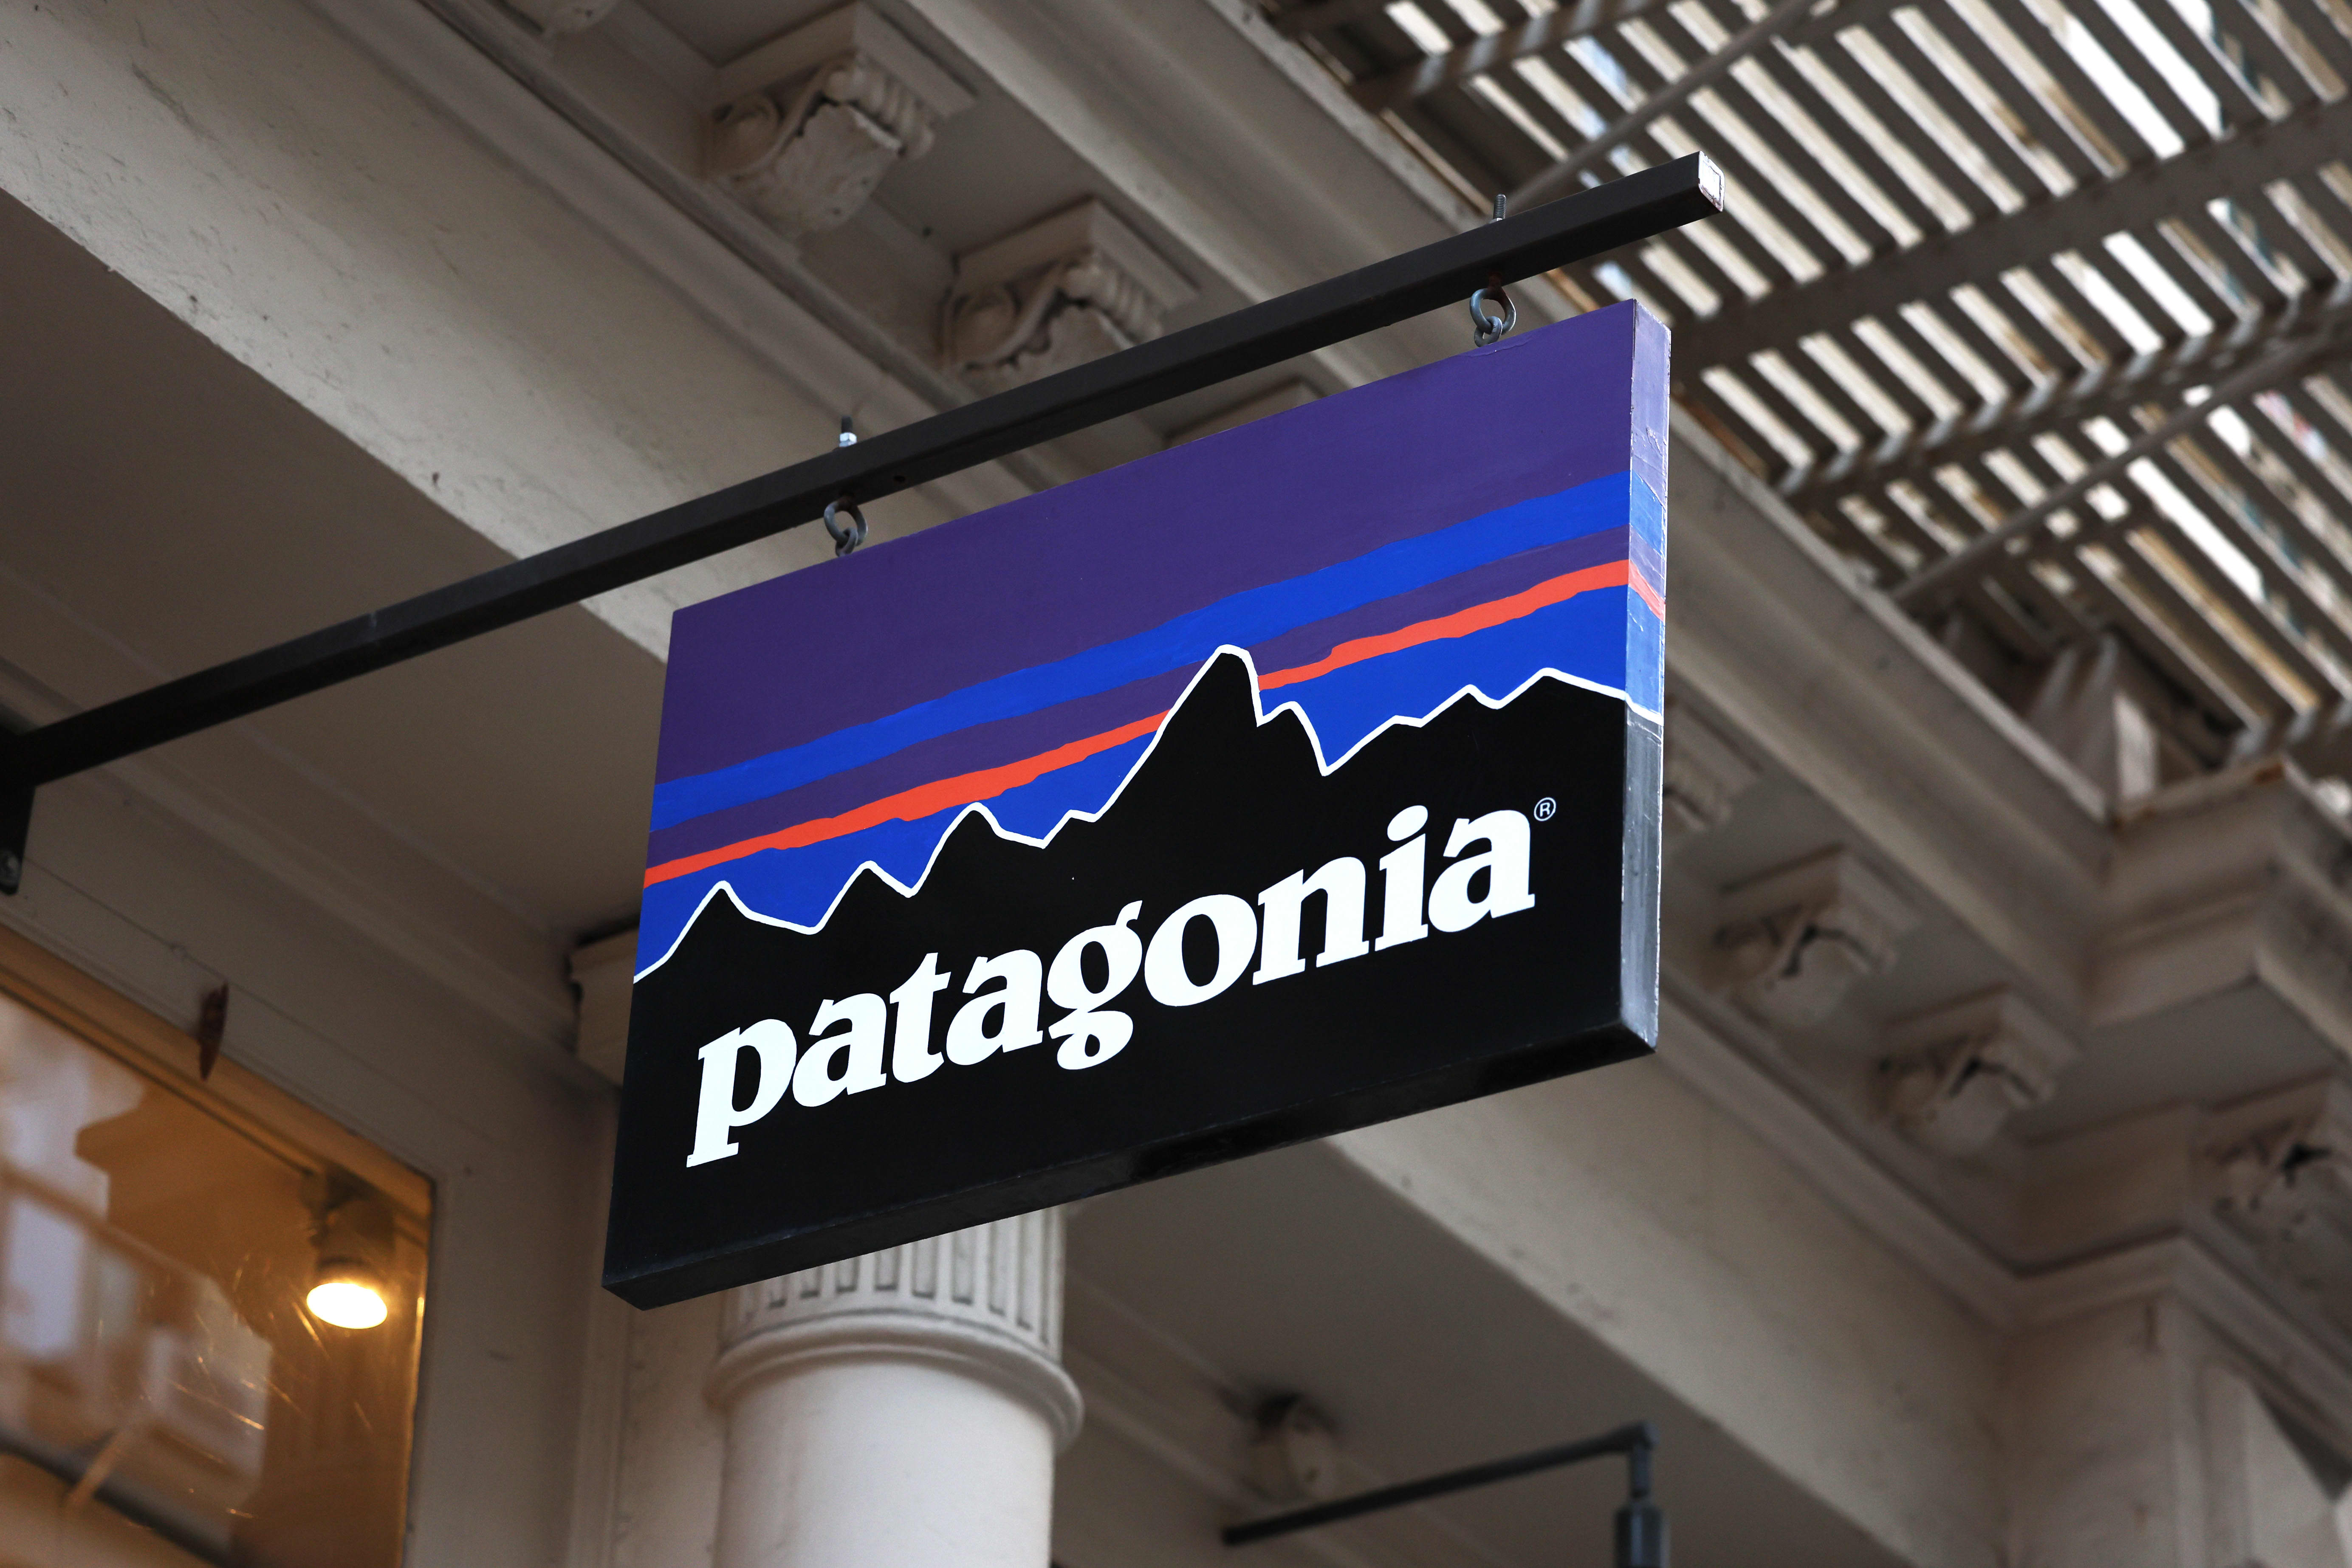 Is Patagonia the end game for profits in a world of climate change?